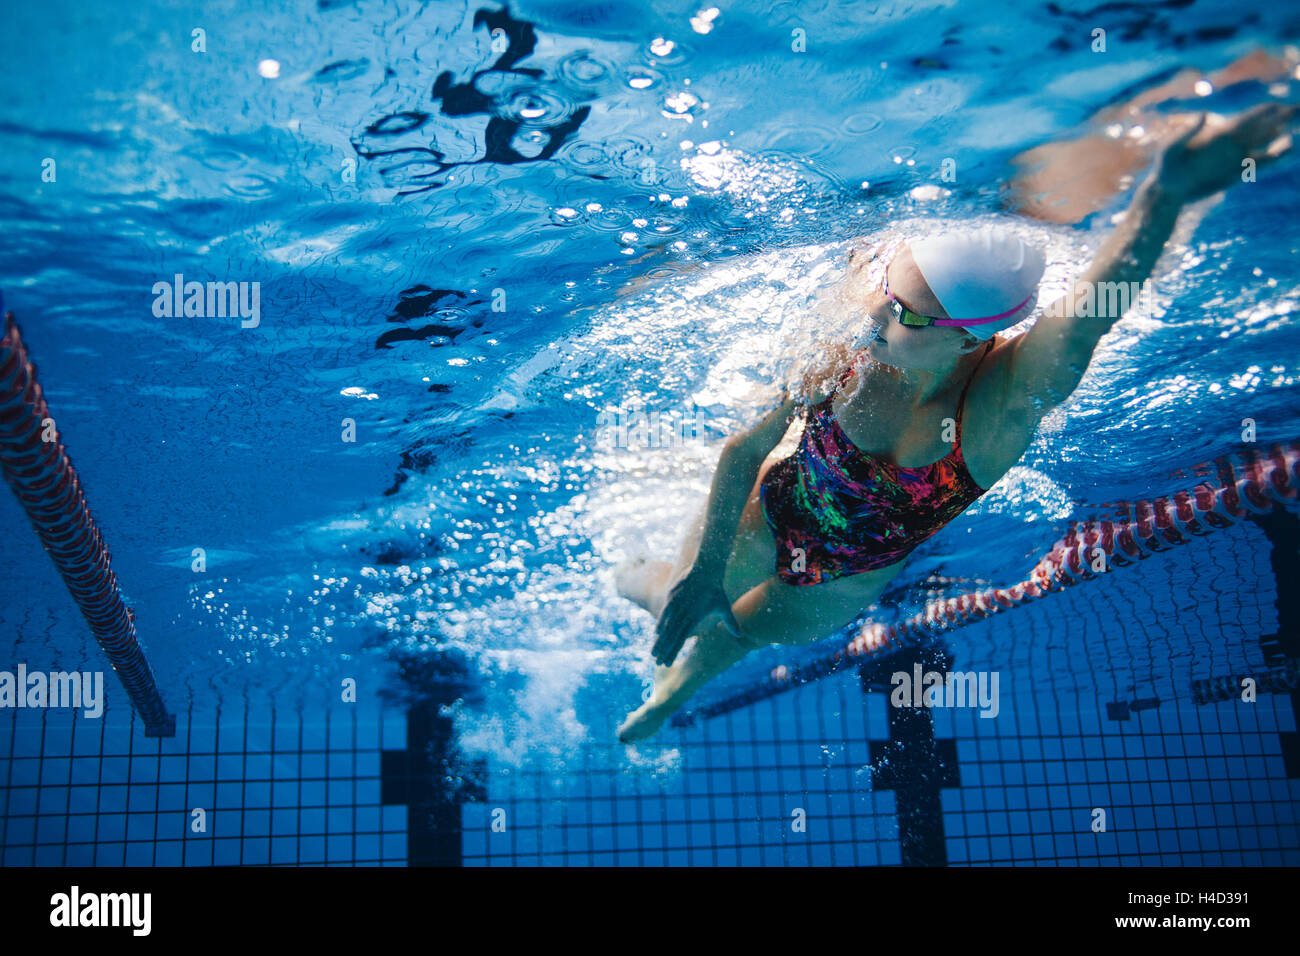 Underwater shot of fit swimmer training in the pool. Female swimmer inside swimming pool. Stock Photo